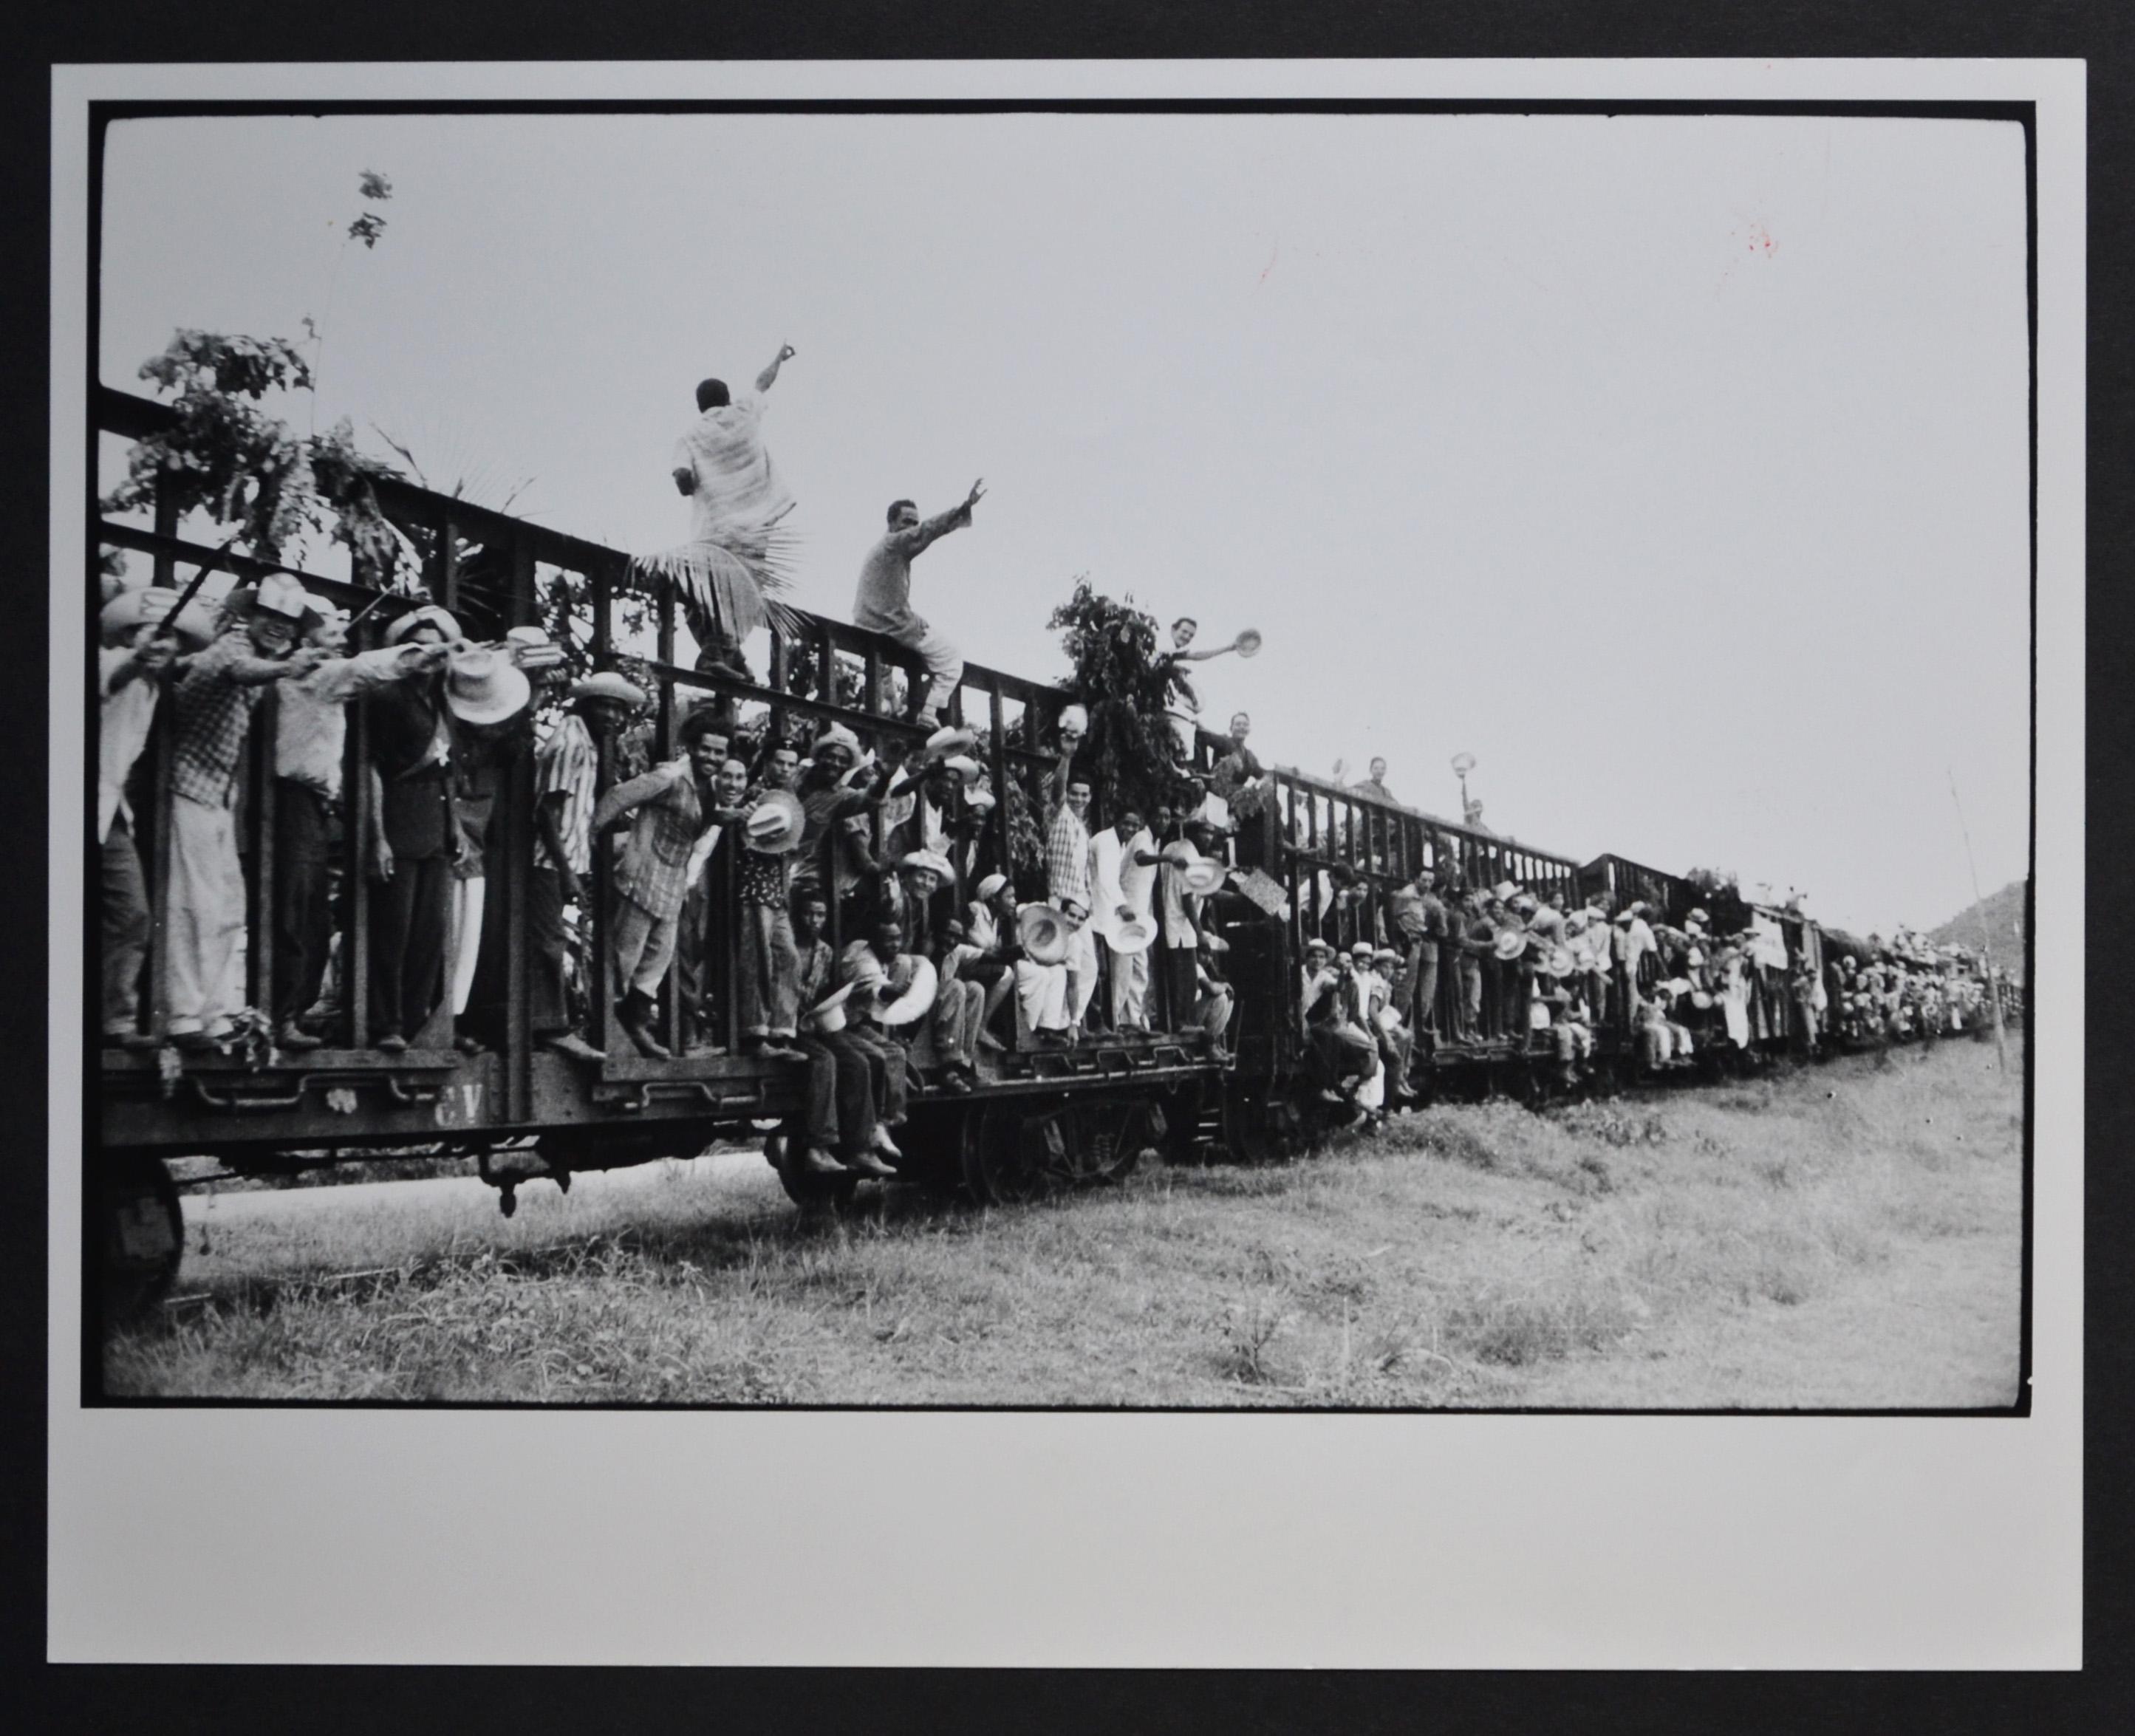 Rolf Gillhausen Black and White Photograph - Cubans on a train, Cuba 1950s.